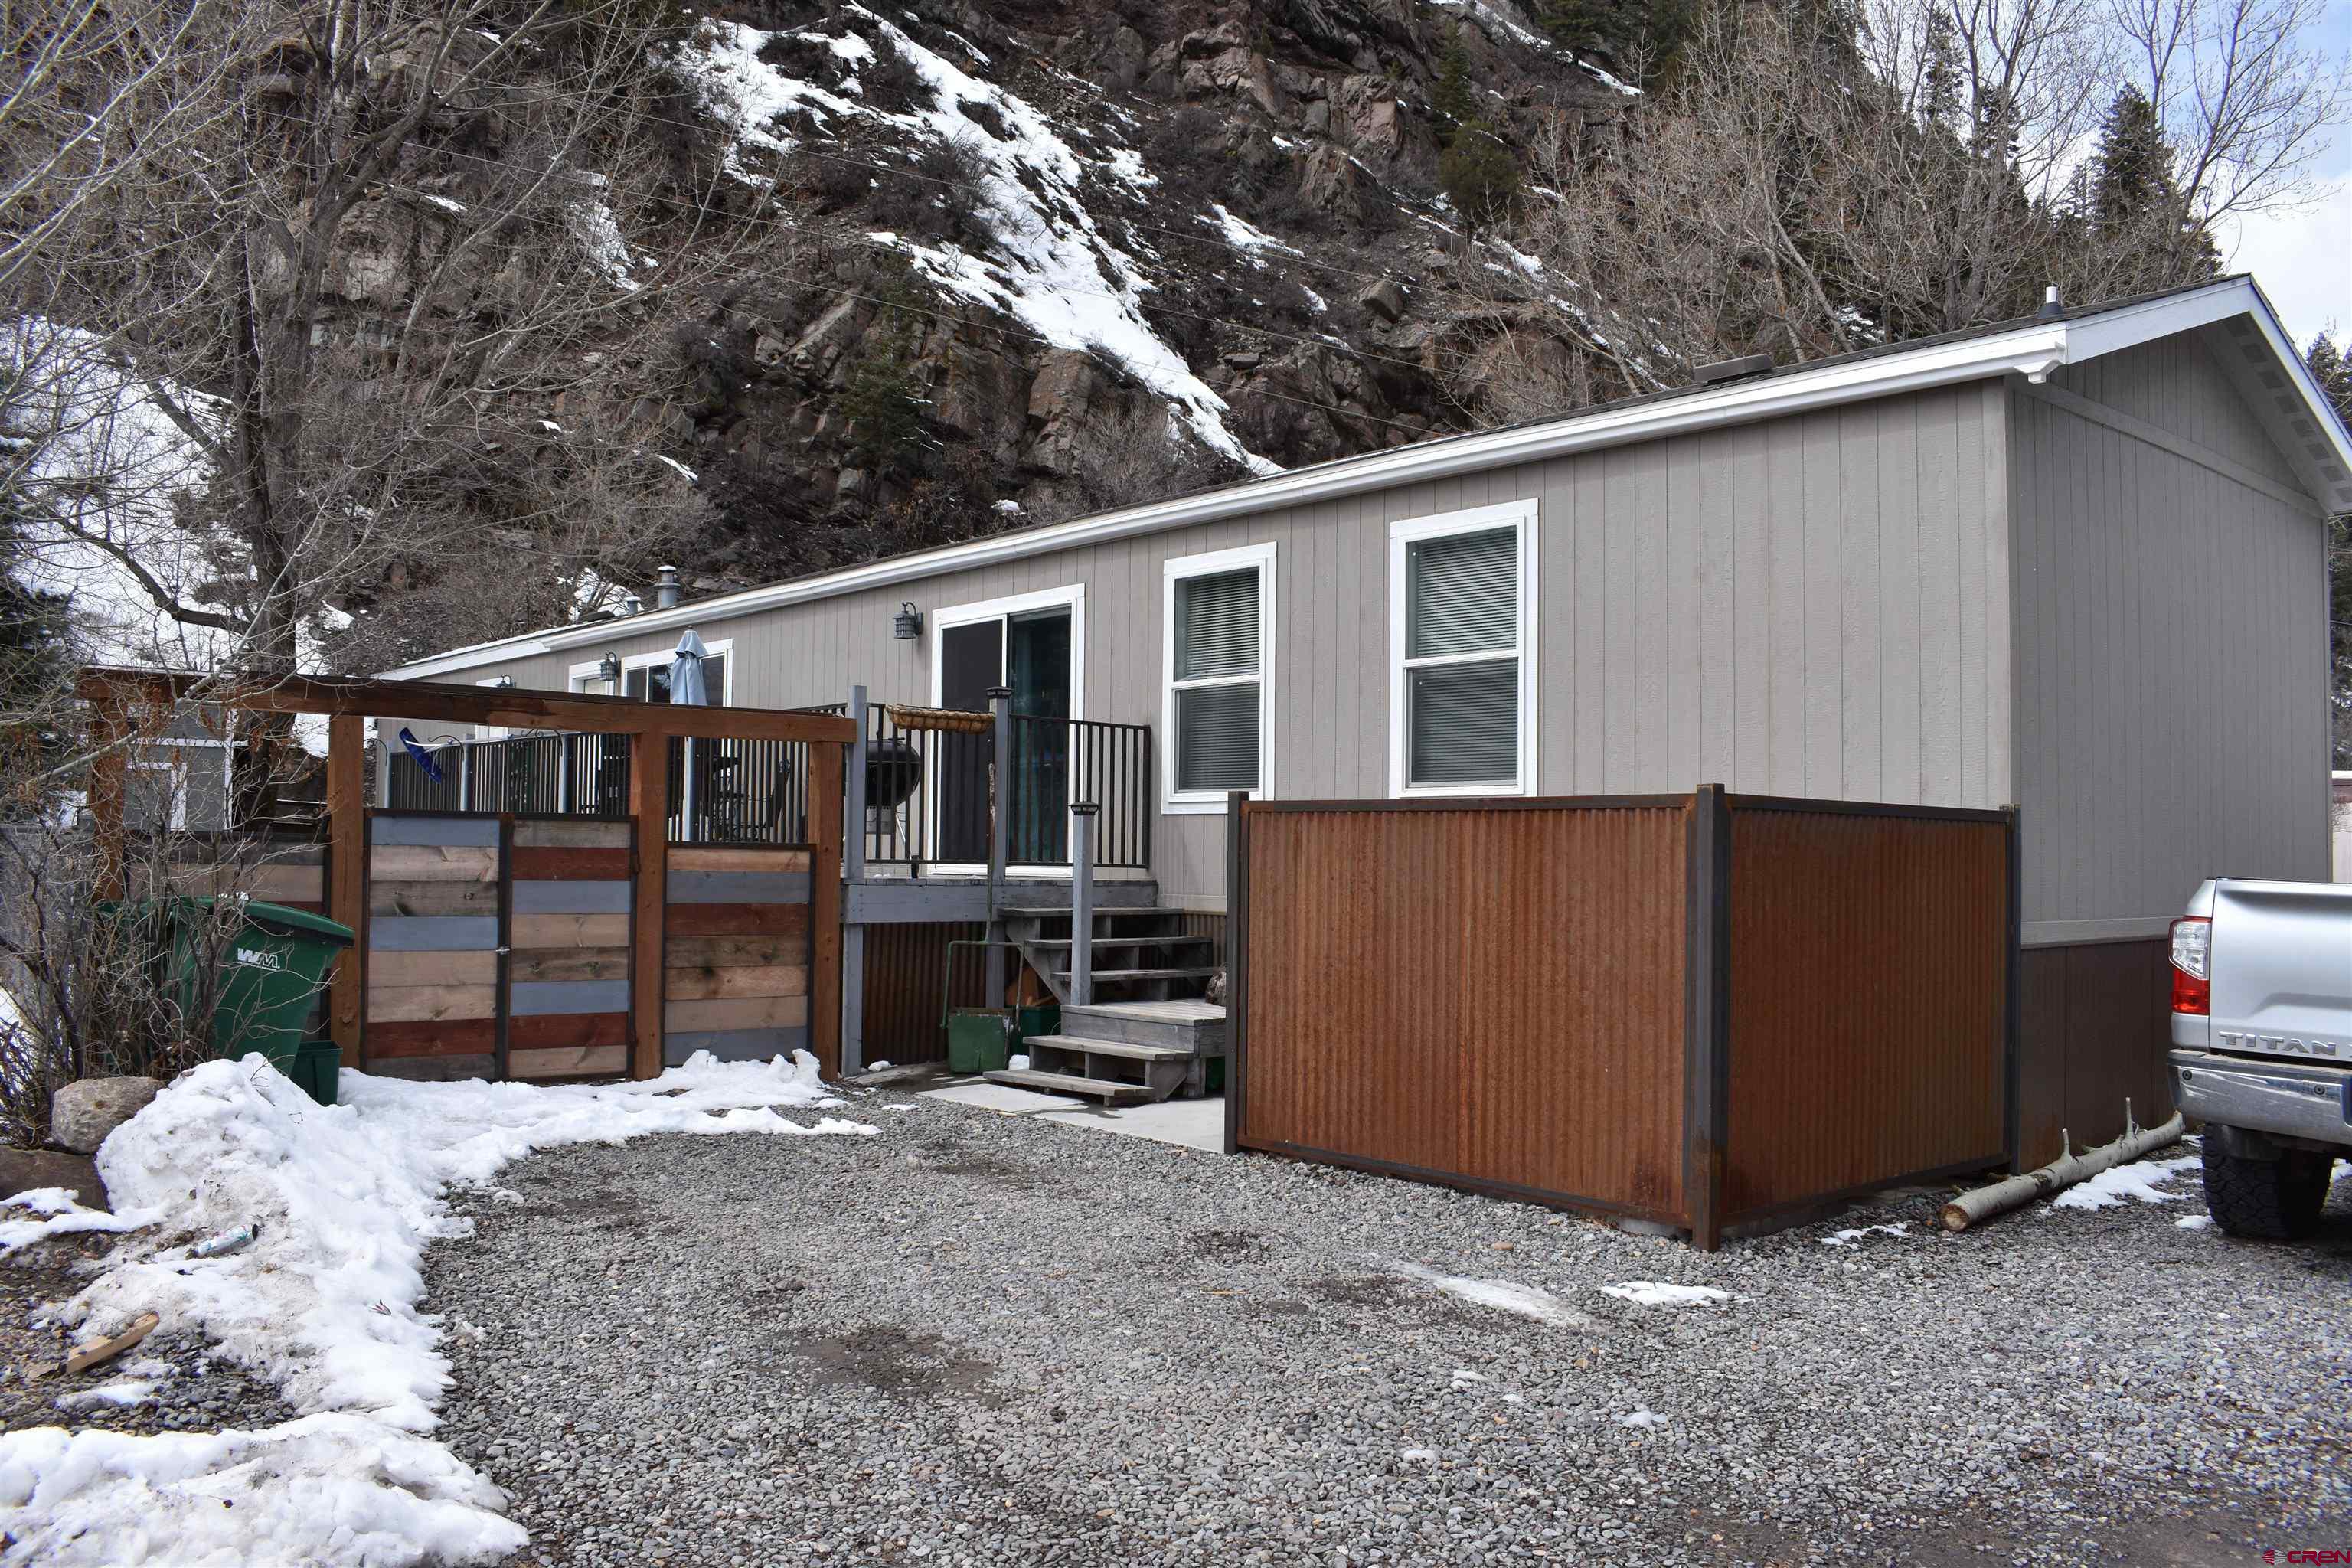 This beautiful, meticulously maintained three year old home is located in the 4J RV park in downtown Ouray, Colorado! Just steps away from the Ouray Hot Springs Pool and Park, shopping, restaurants, hiking trails and all Ouray has to offer!  This home has many desirable features. 85 pound snow load, sheetrock walls with 9 foot vaulted ceilings and beautiful crown molding throughout the house. The kitchen is large with plenty of storage in the bright white cabinets, lots of countertop space, an apron sink, stainless steel appliances, soft close drawers, stacked stone backsplash, and a pot filler faucet above the stove. The open concept makes the kitchen/living/dining area very inviting with lots of south facing windows making the area light and bright. The windows offer lovely views of the Amphitheater, Abrams, and Hayden mountains. The primary bedroom has an ensuite bathroom with double sinks, a tiled shower and a walk in closet. There are two additional bedrooms and a shared bathroom. The laundry room is located off the dining area. In the main living area there are two sets of sliding glass doors leading to a large south facing deck with all the mountain views and Colorado sunshine!  The fully fenced, landscaped yard features a very large mature cottonwood tree, grass, private hot tub and storage shed. The lot rent for this home is $437 per month and that includes your water, sewer and trash. Unit must be owner occupied. All buyers will need to be approved by the 4J park prior to closing. Don't miss out on this great opportunity to make Ouray your home!